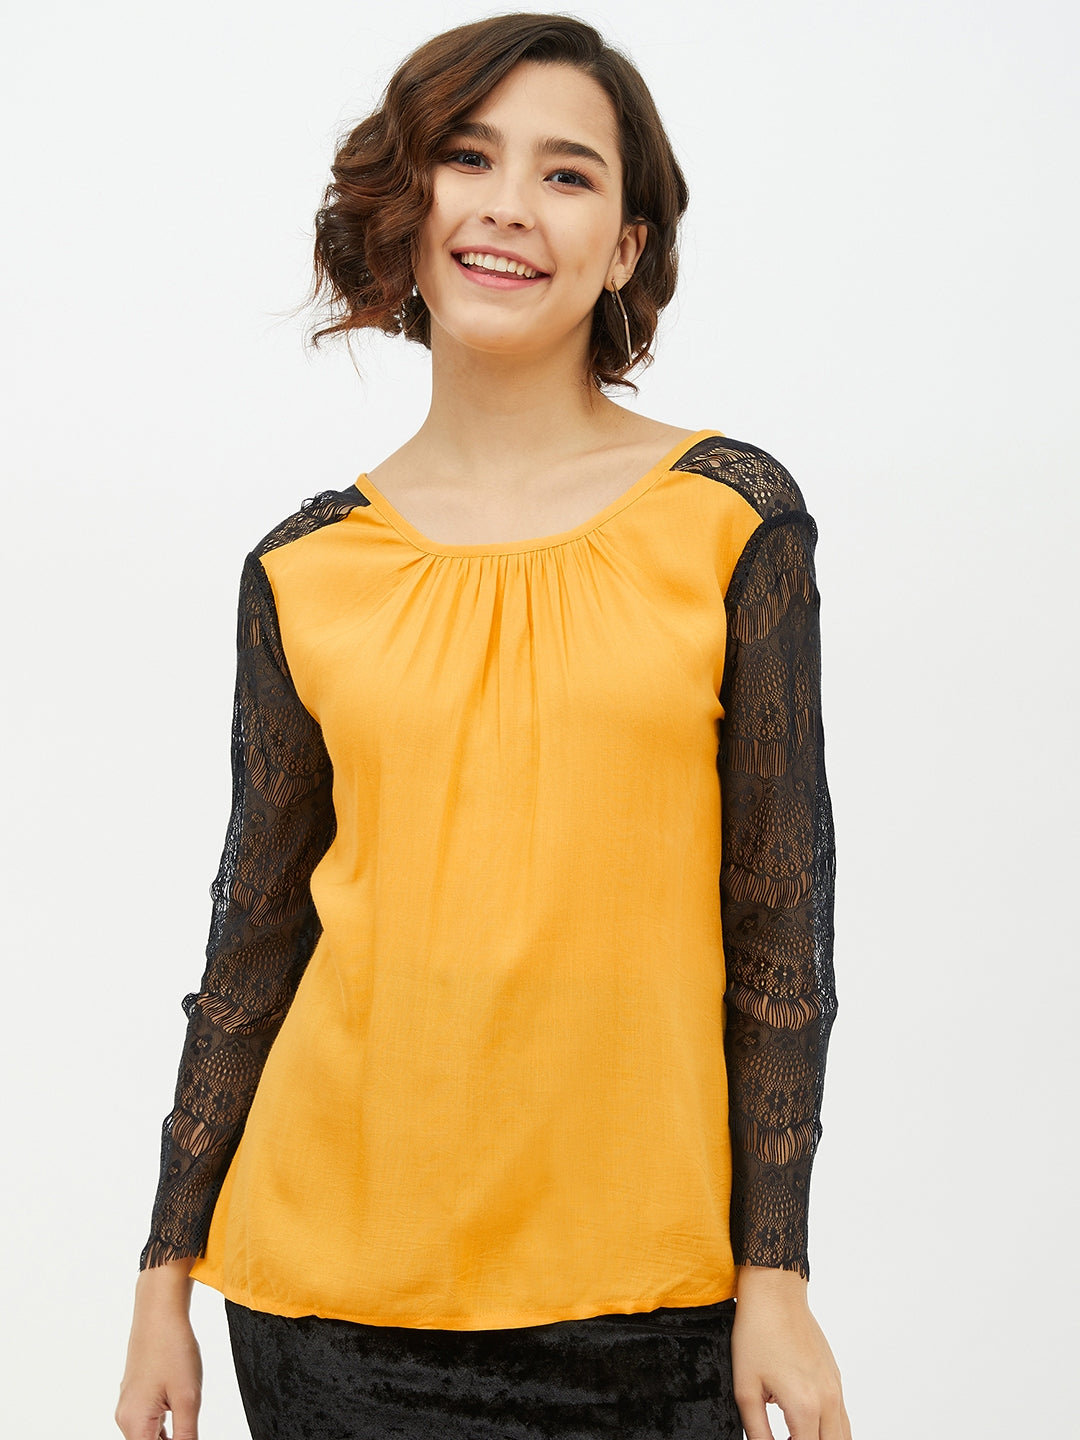 Women's Yellow Rayon Top with Lace Sleeve - StyleStone